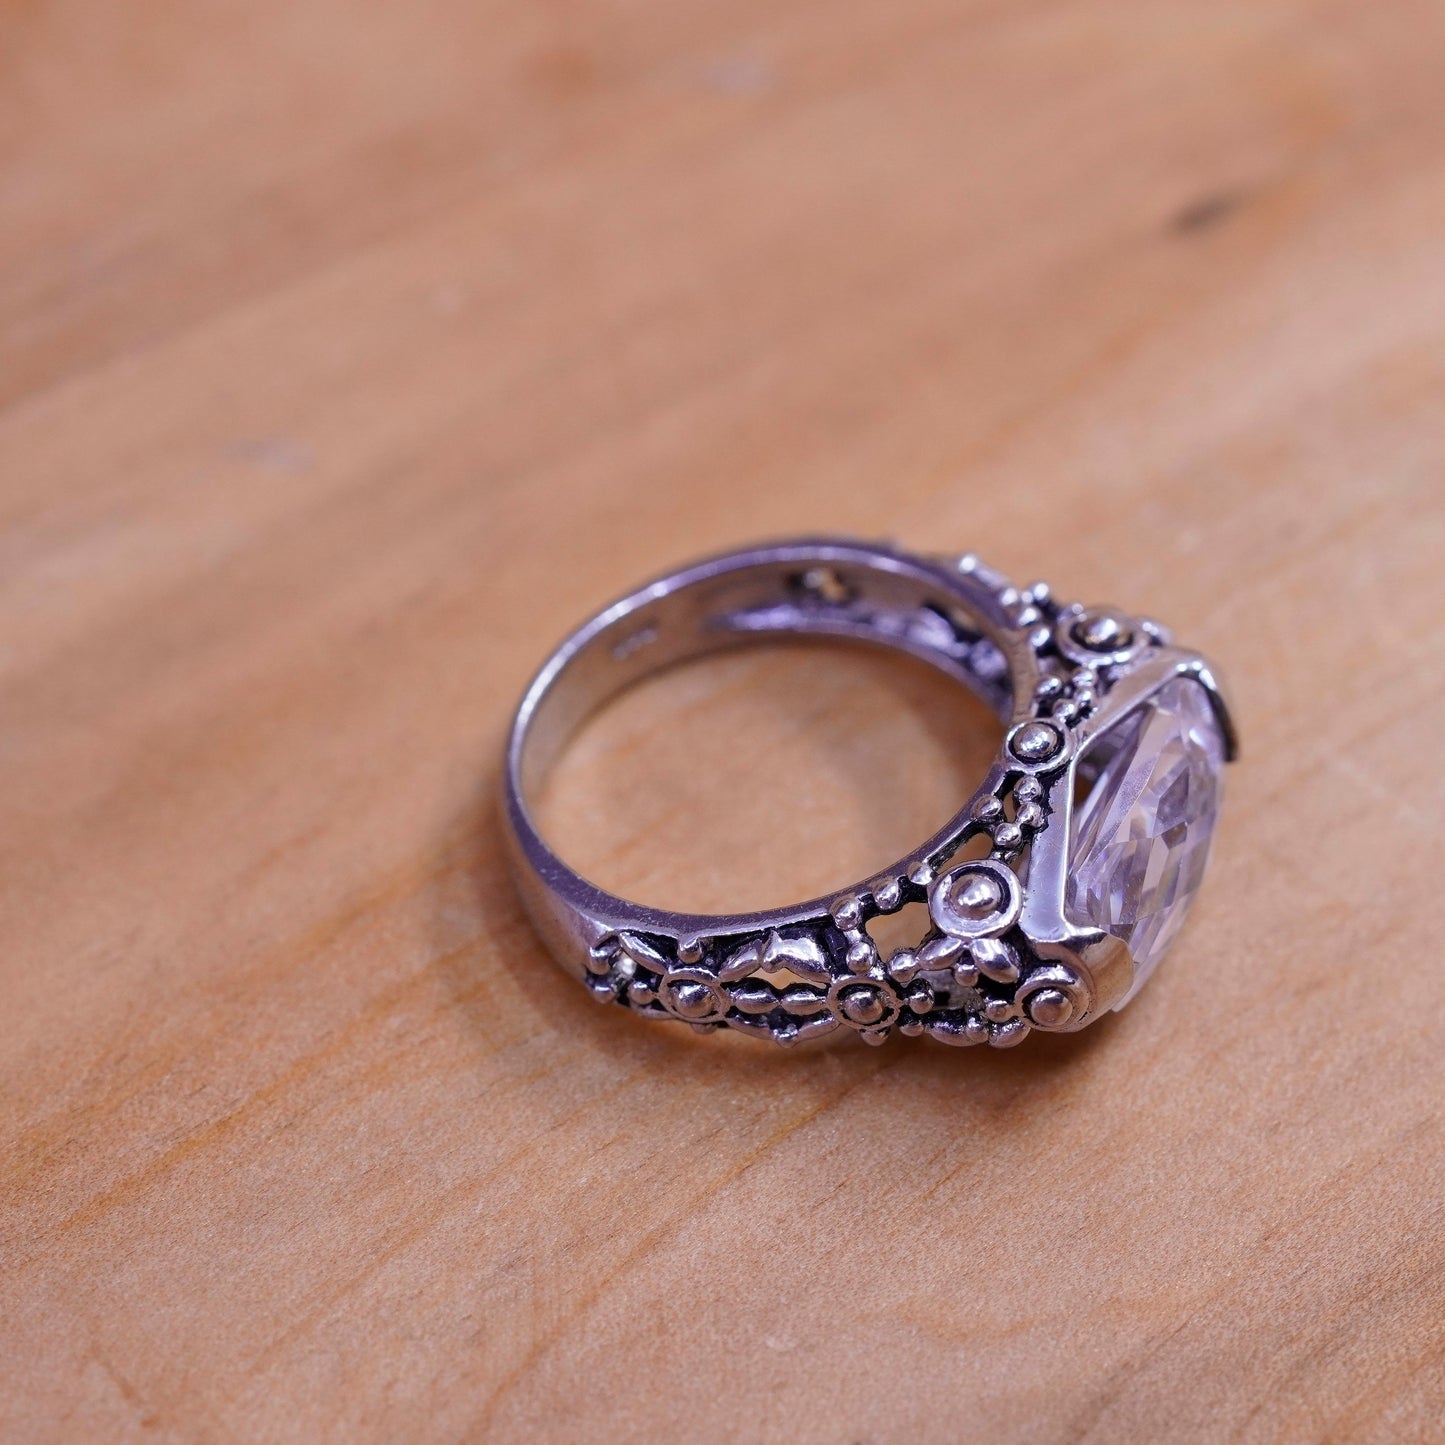 Size 7, vintage Sterling silver handmade ring, 925 filigree band with cz